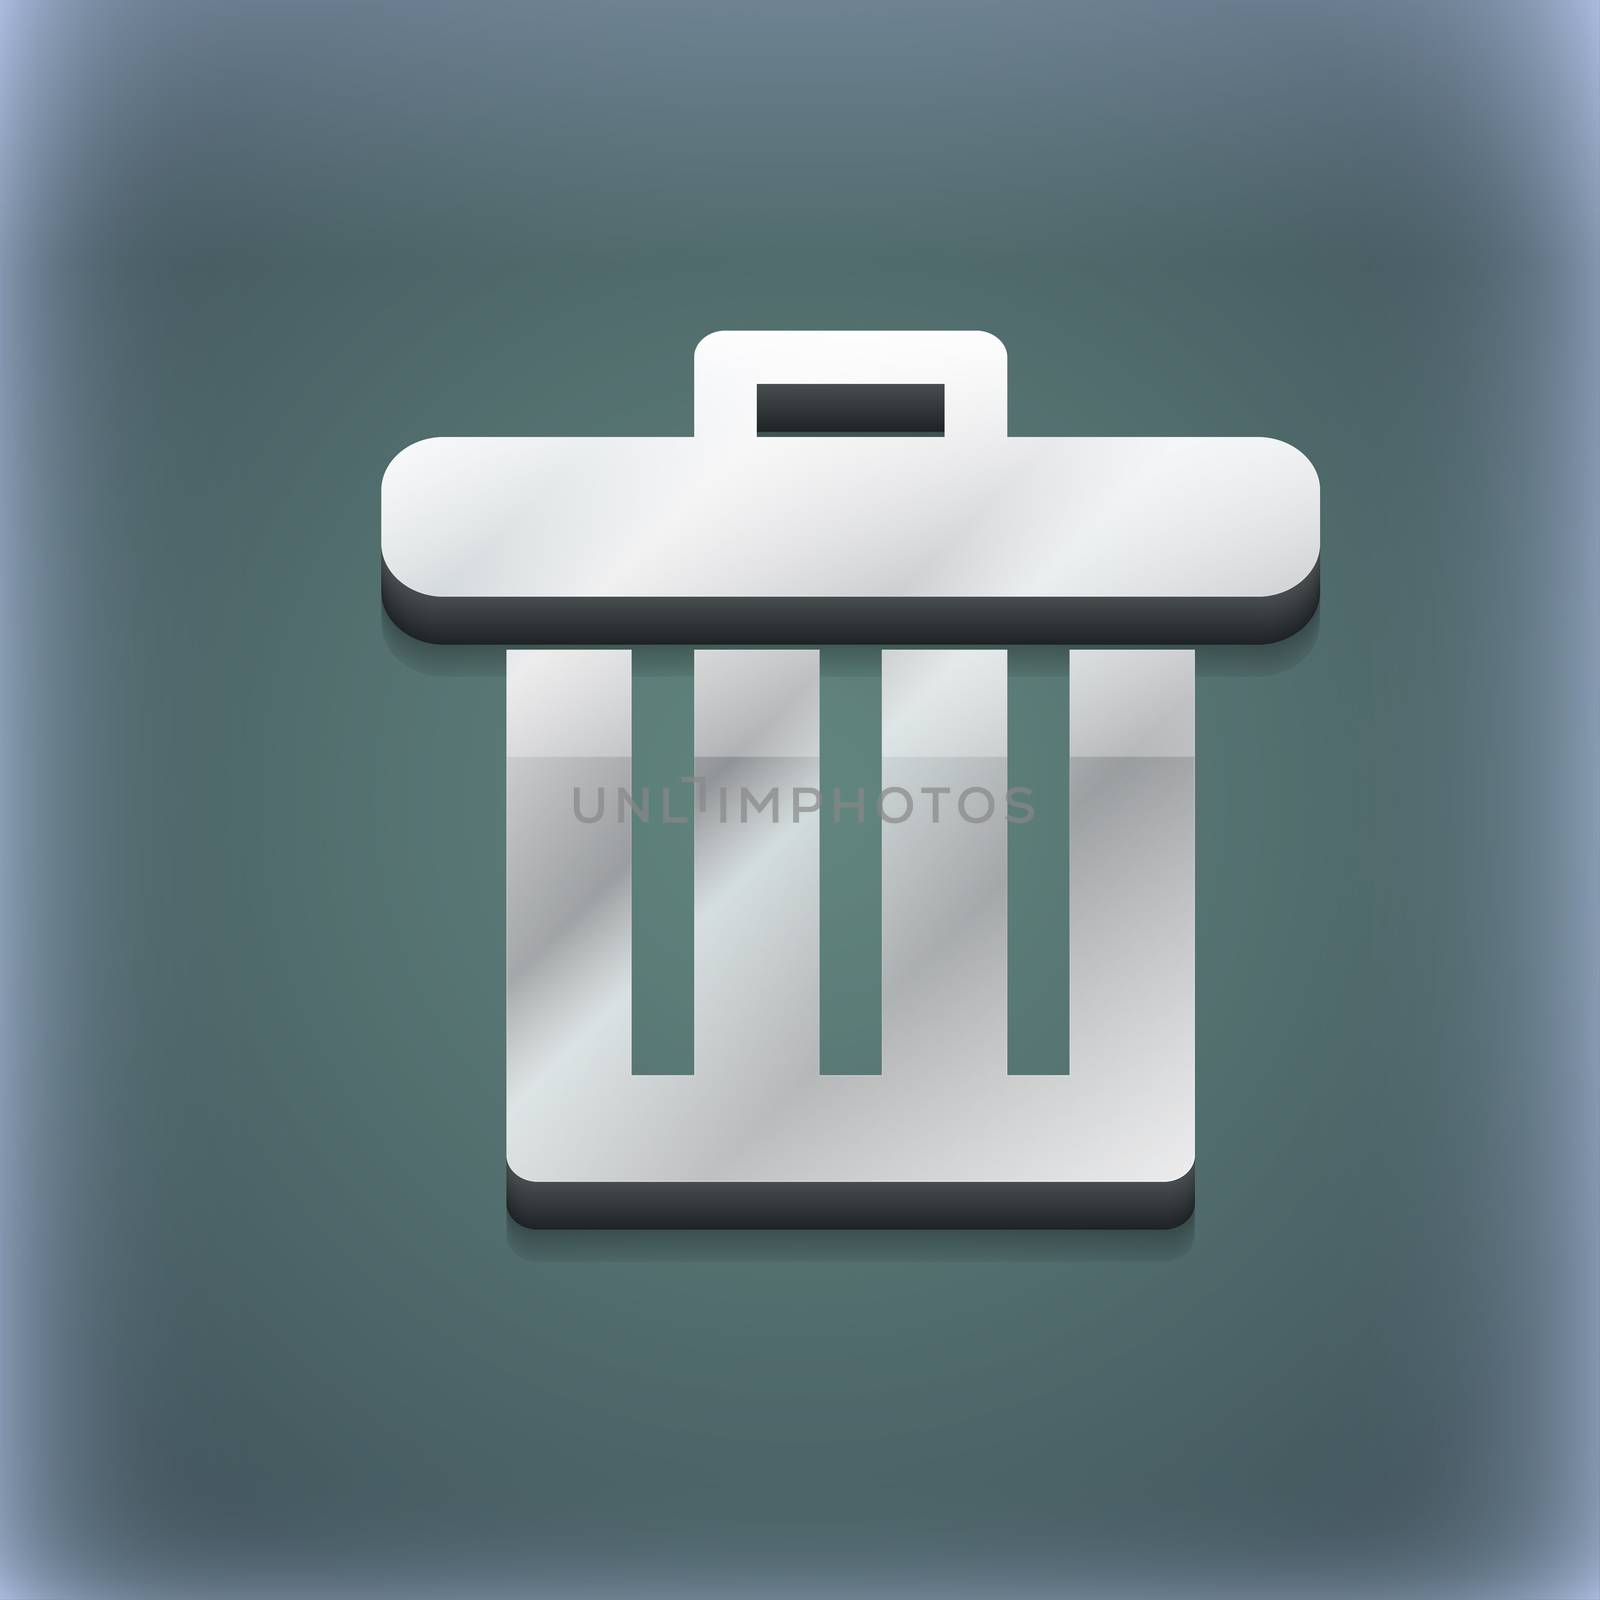 Recycle bin icon symbol. 3D style. Trendy, modern design with space for your text illustration. Raster version